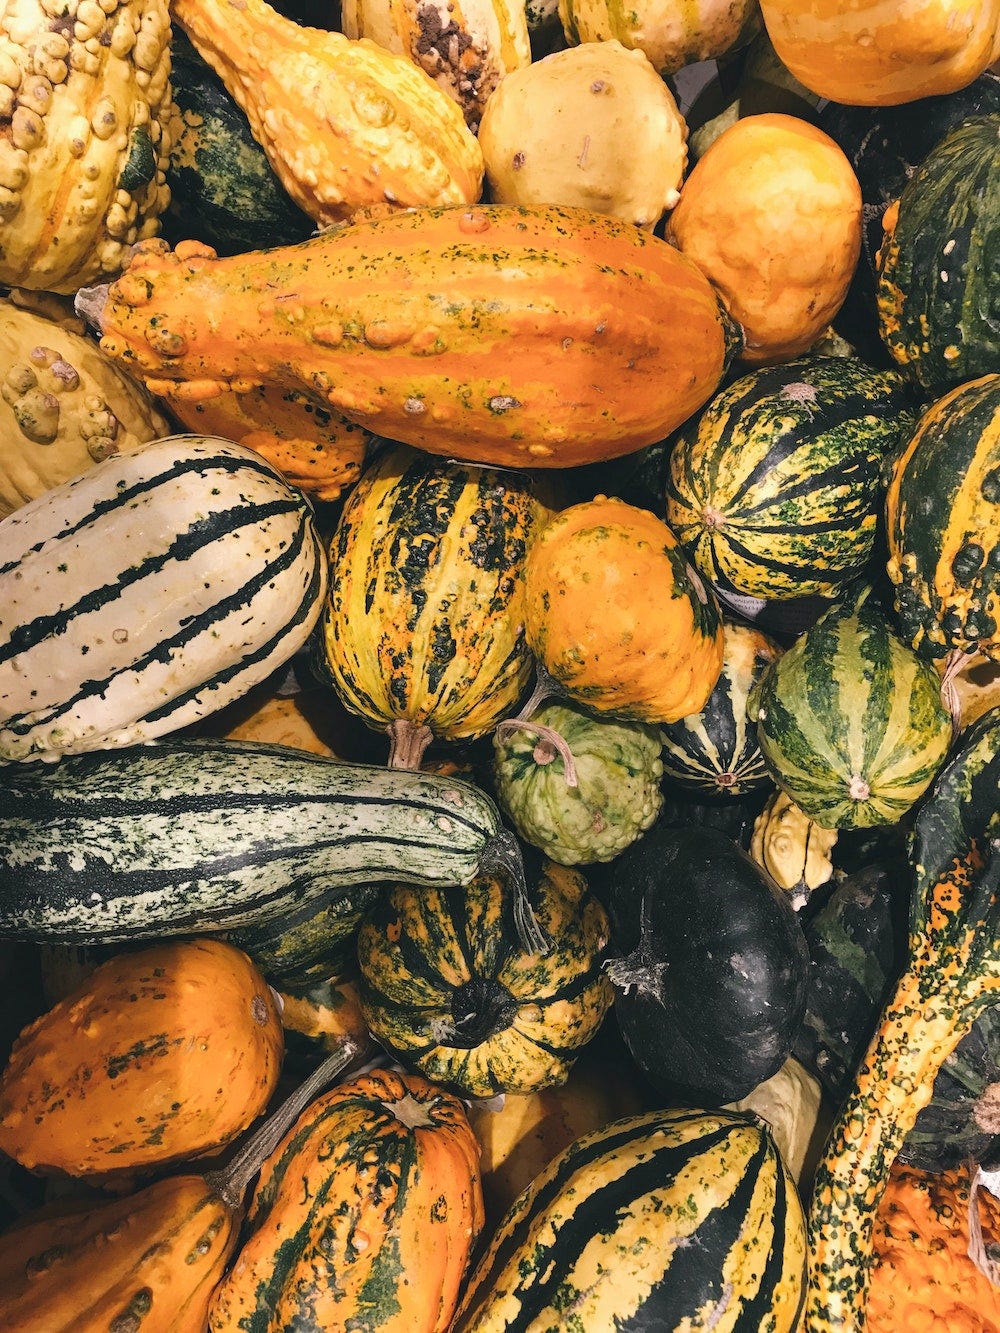 Andrew Zimmern's favorite ways to use squash.